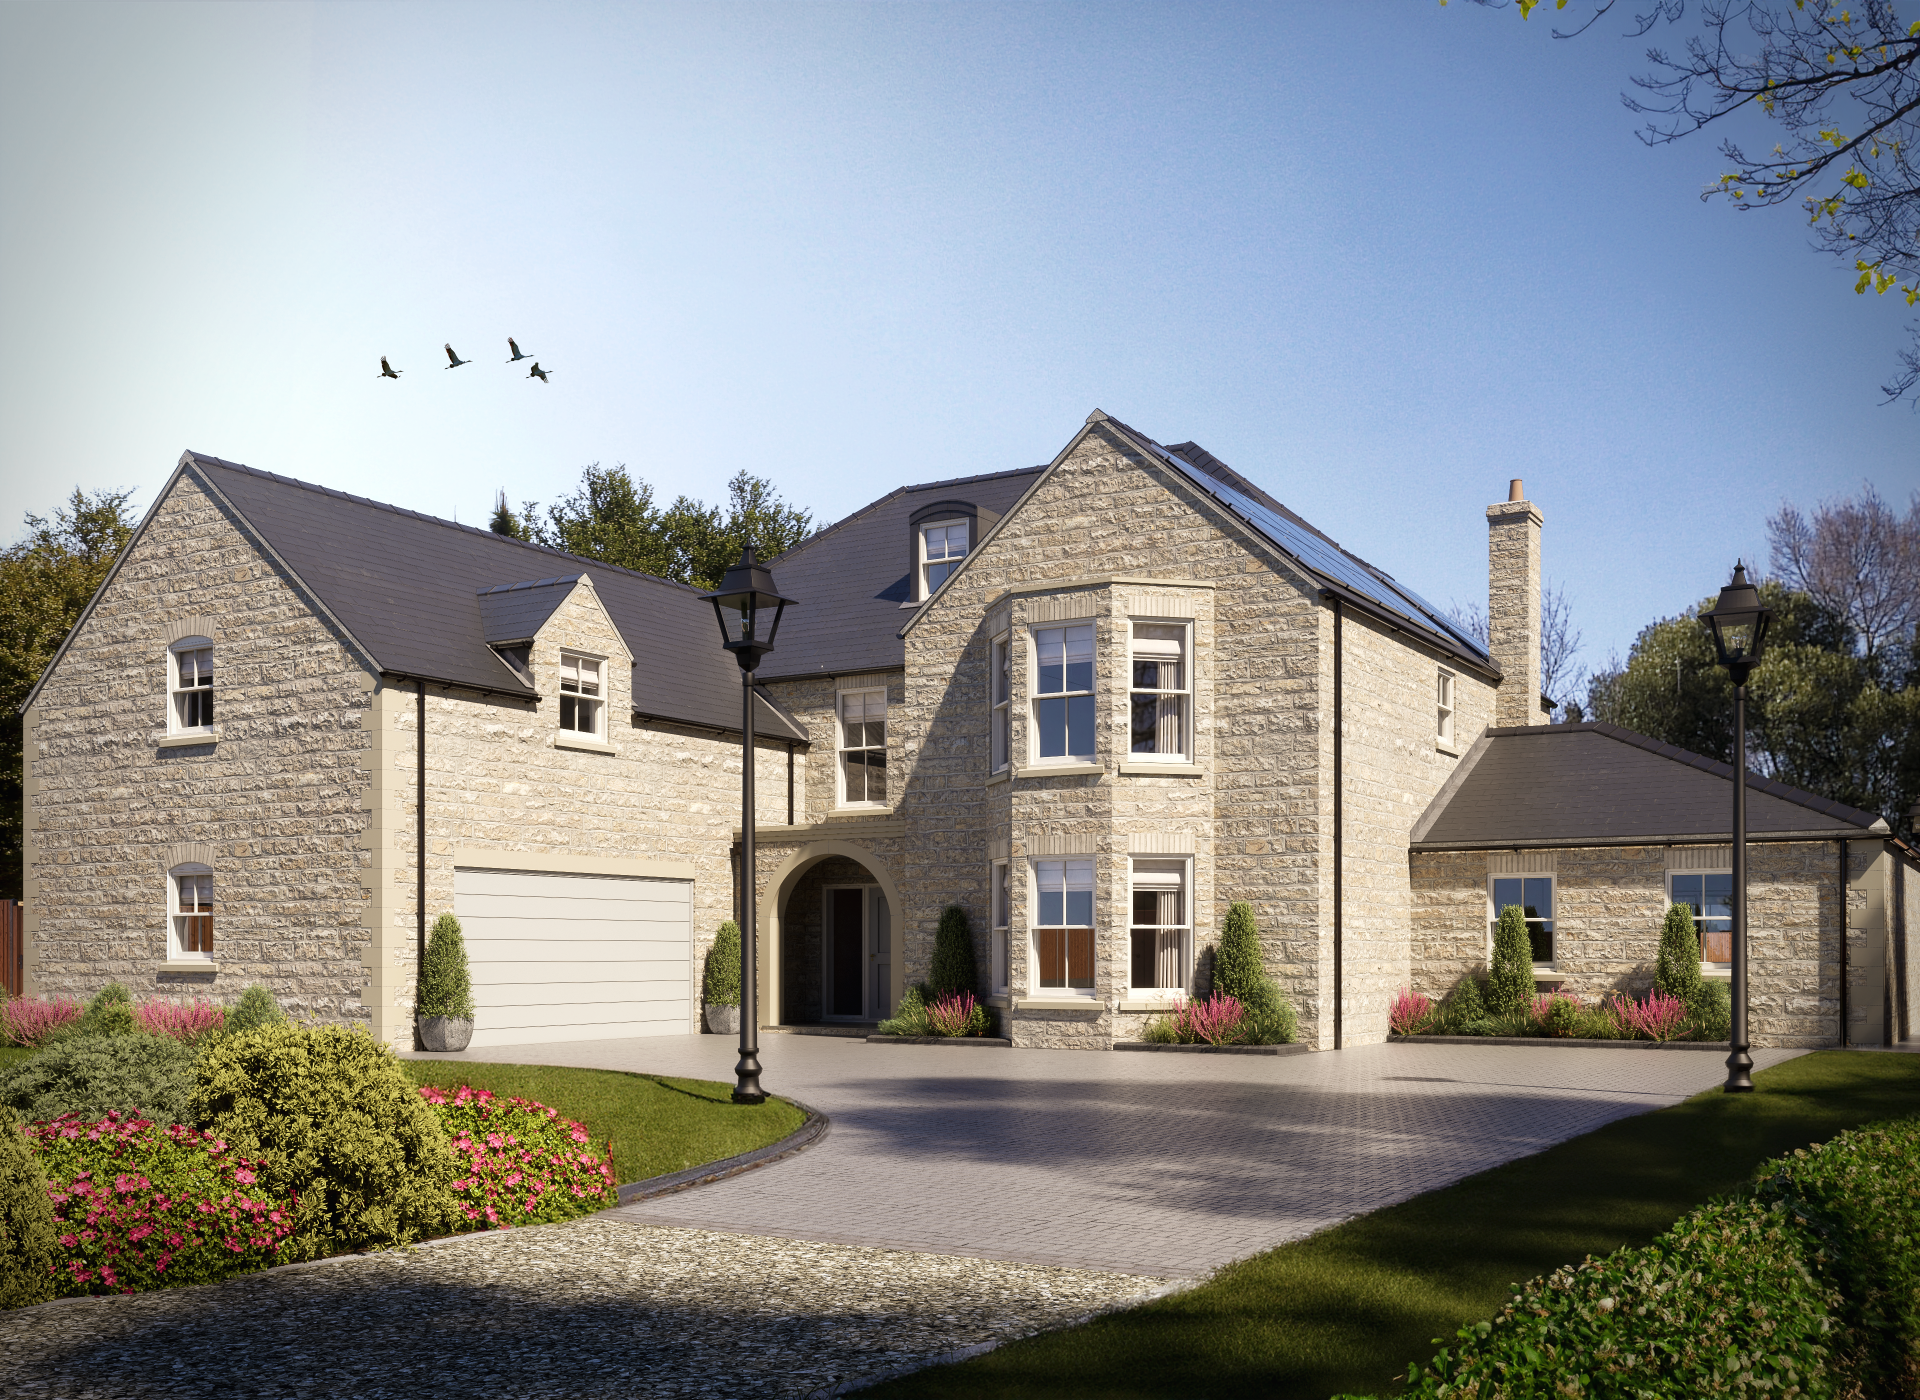 Planning Application approved and Planning Permission Granted for a syunning new self build home near Lincoln